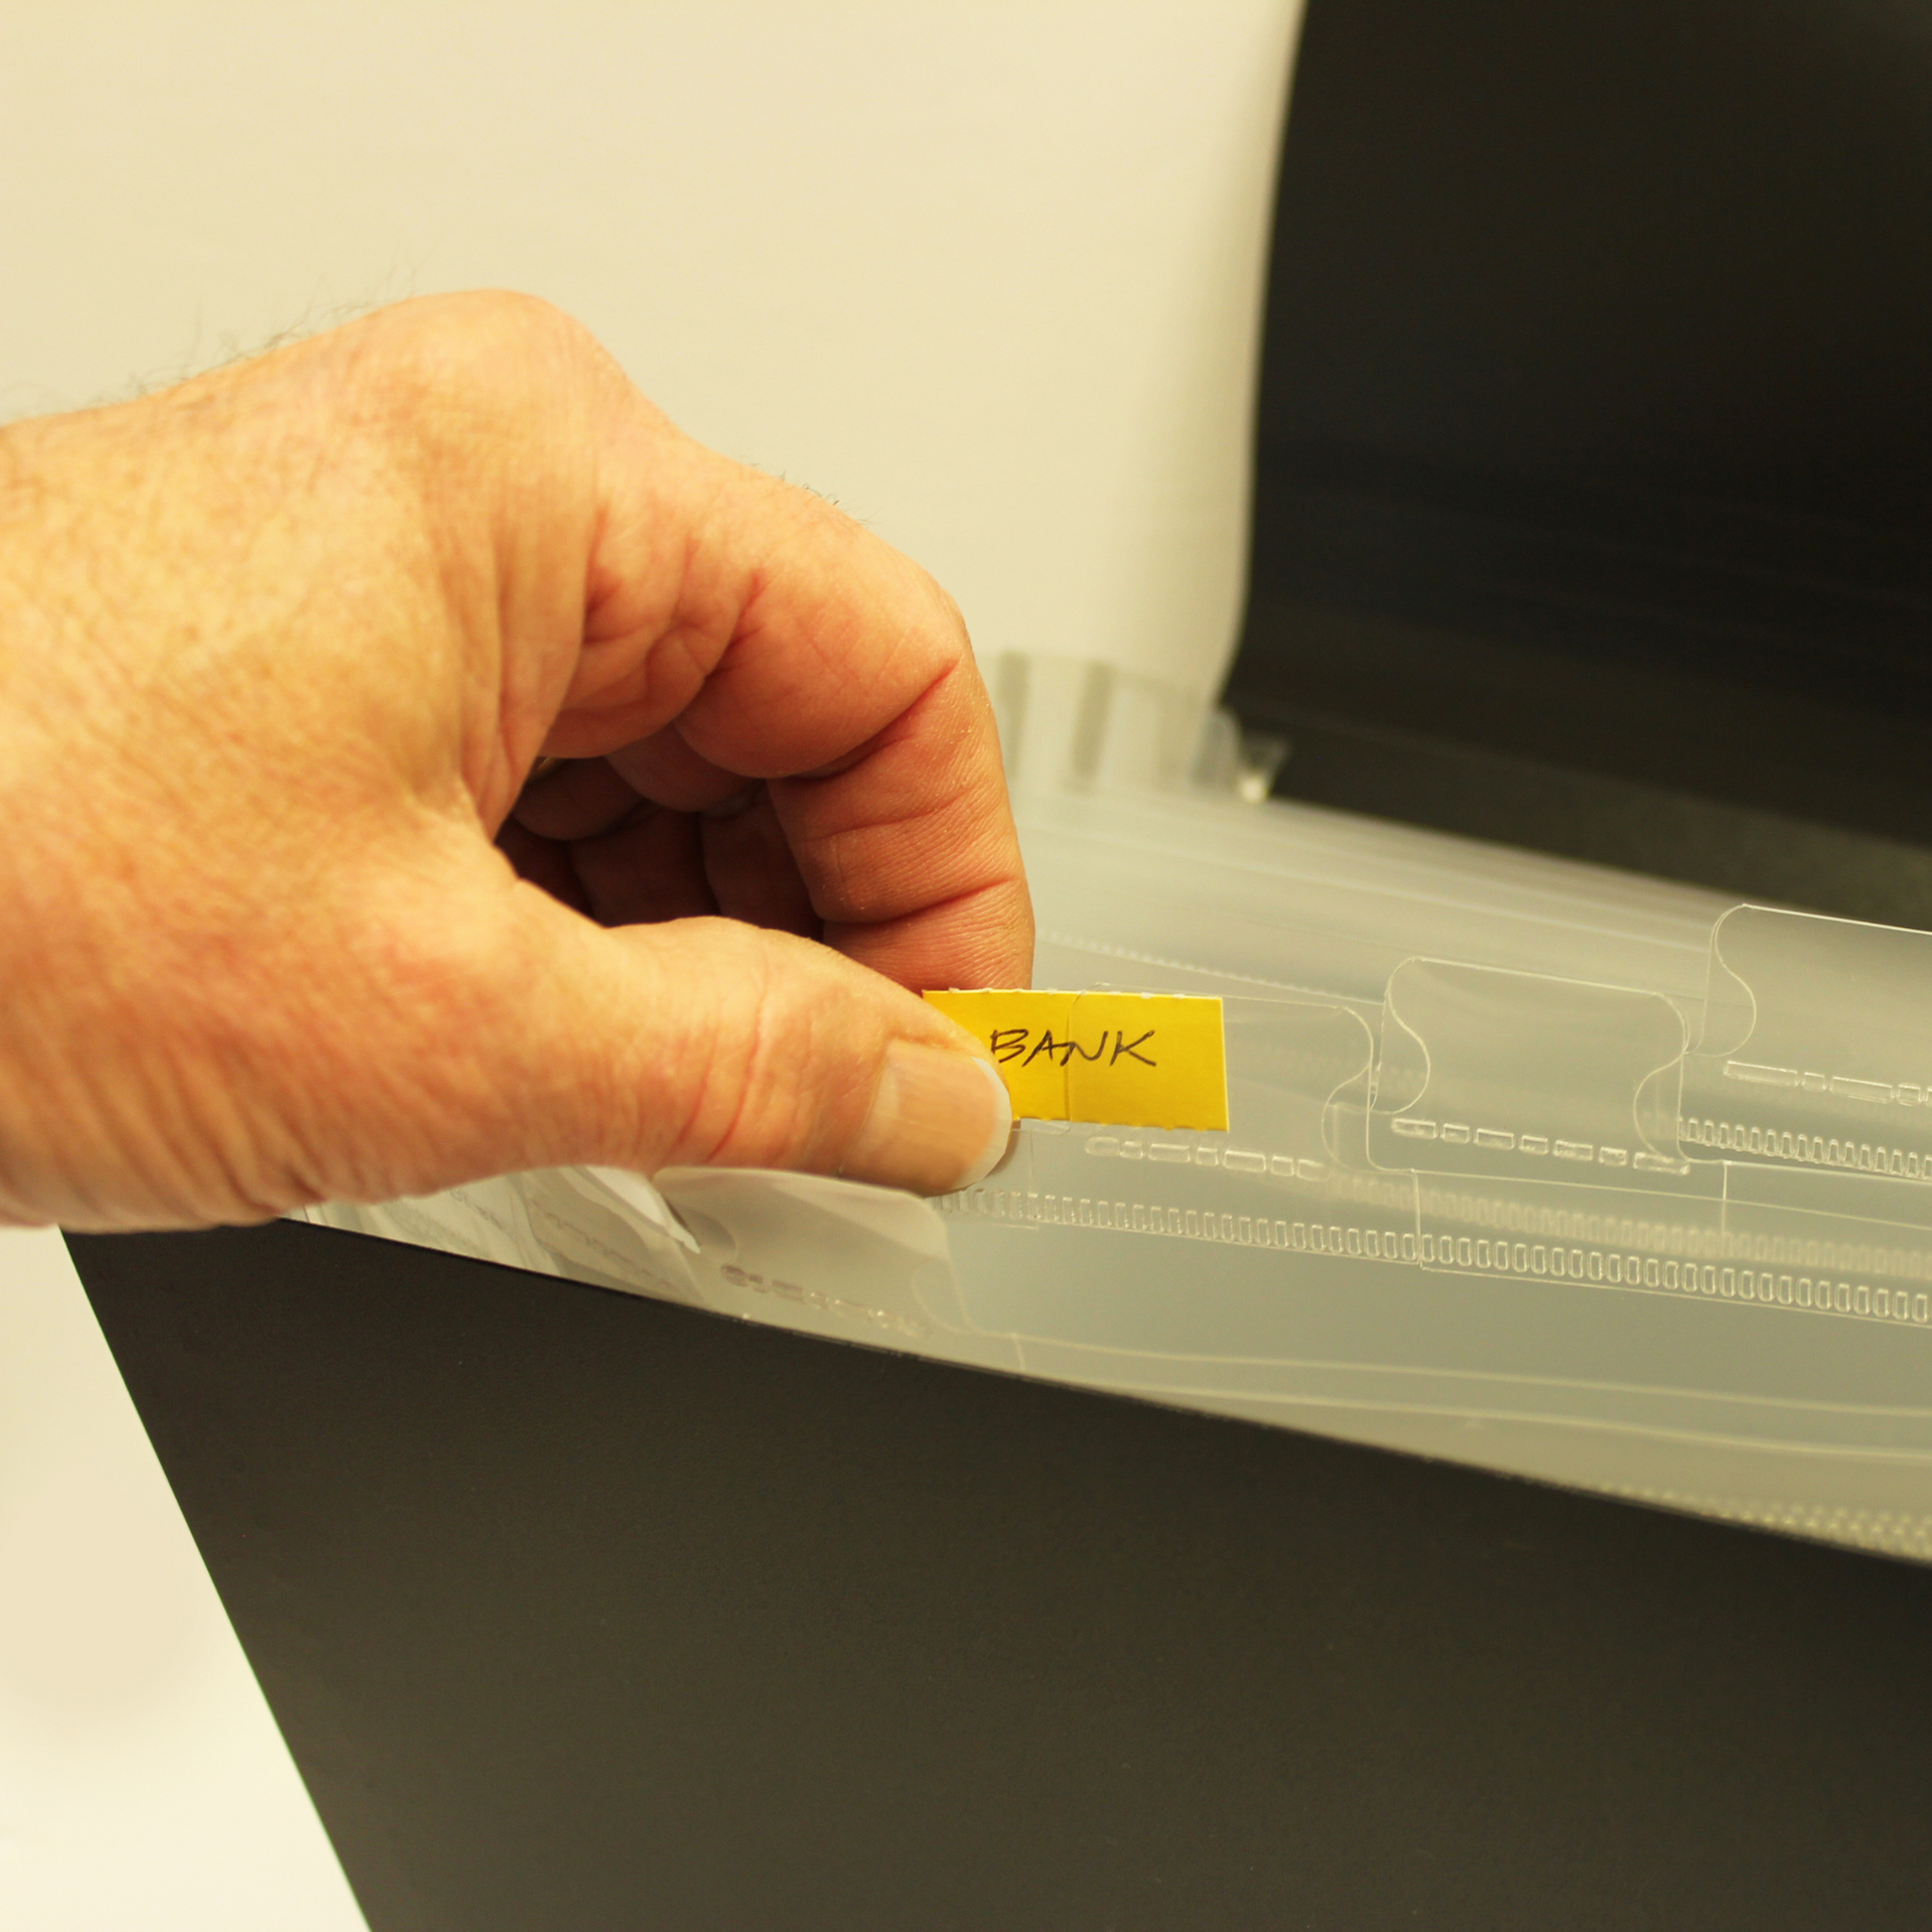 A person's hand is inserting a yellow tab labeled 'BANK' into a clear plastic sleeve of an expanding file organizer. The action suggests categorizing or labeling documents for efficient organization, with the hand positioned for precise placement of the label.